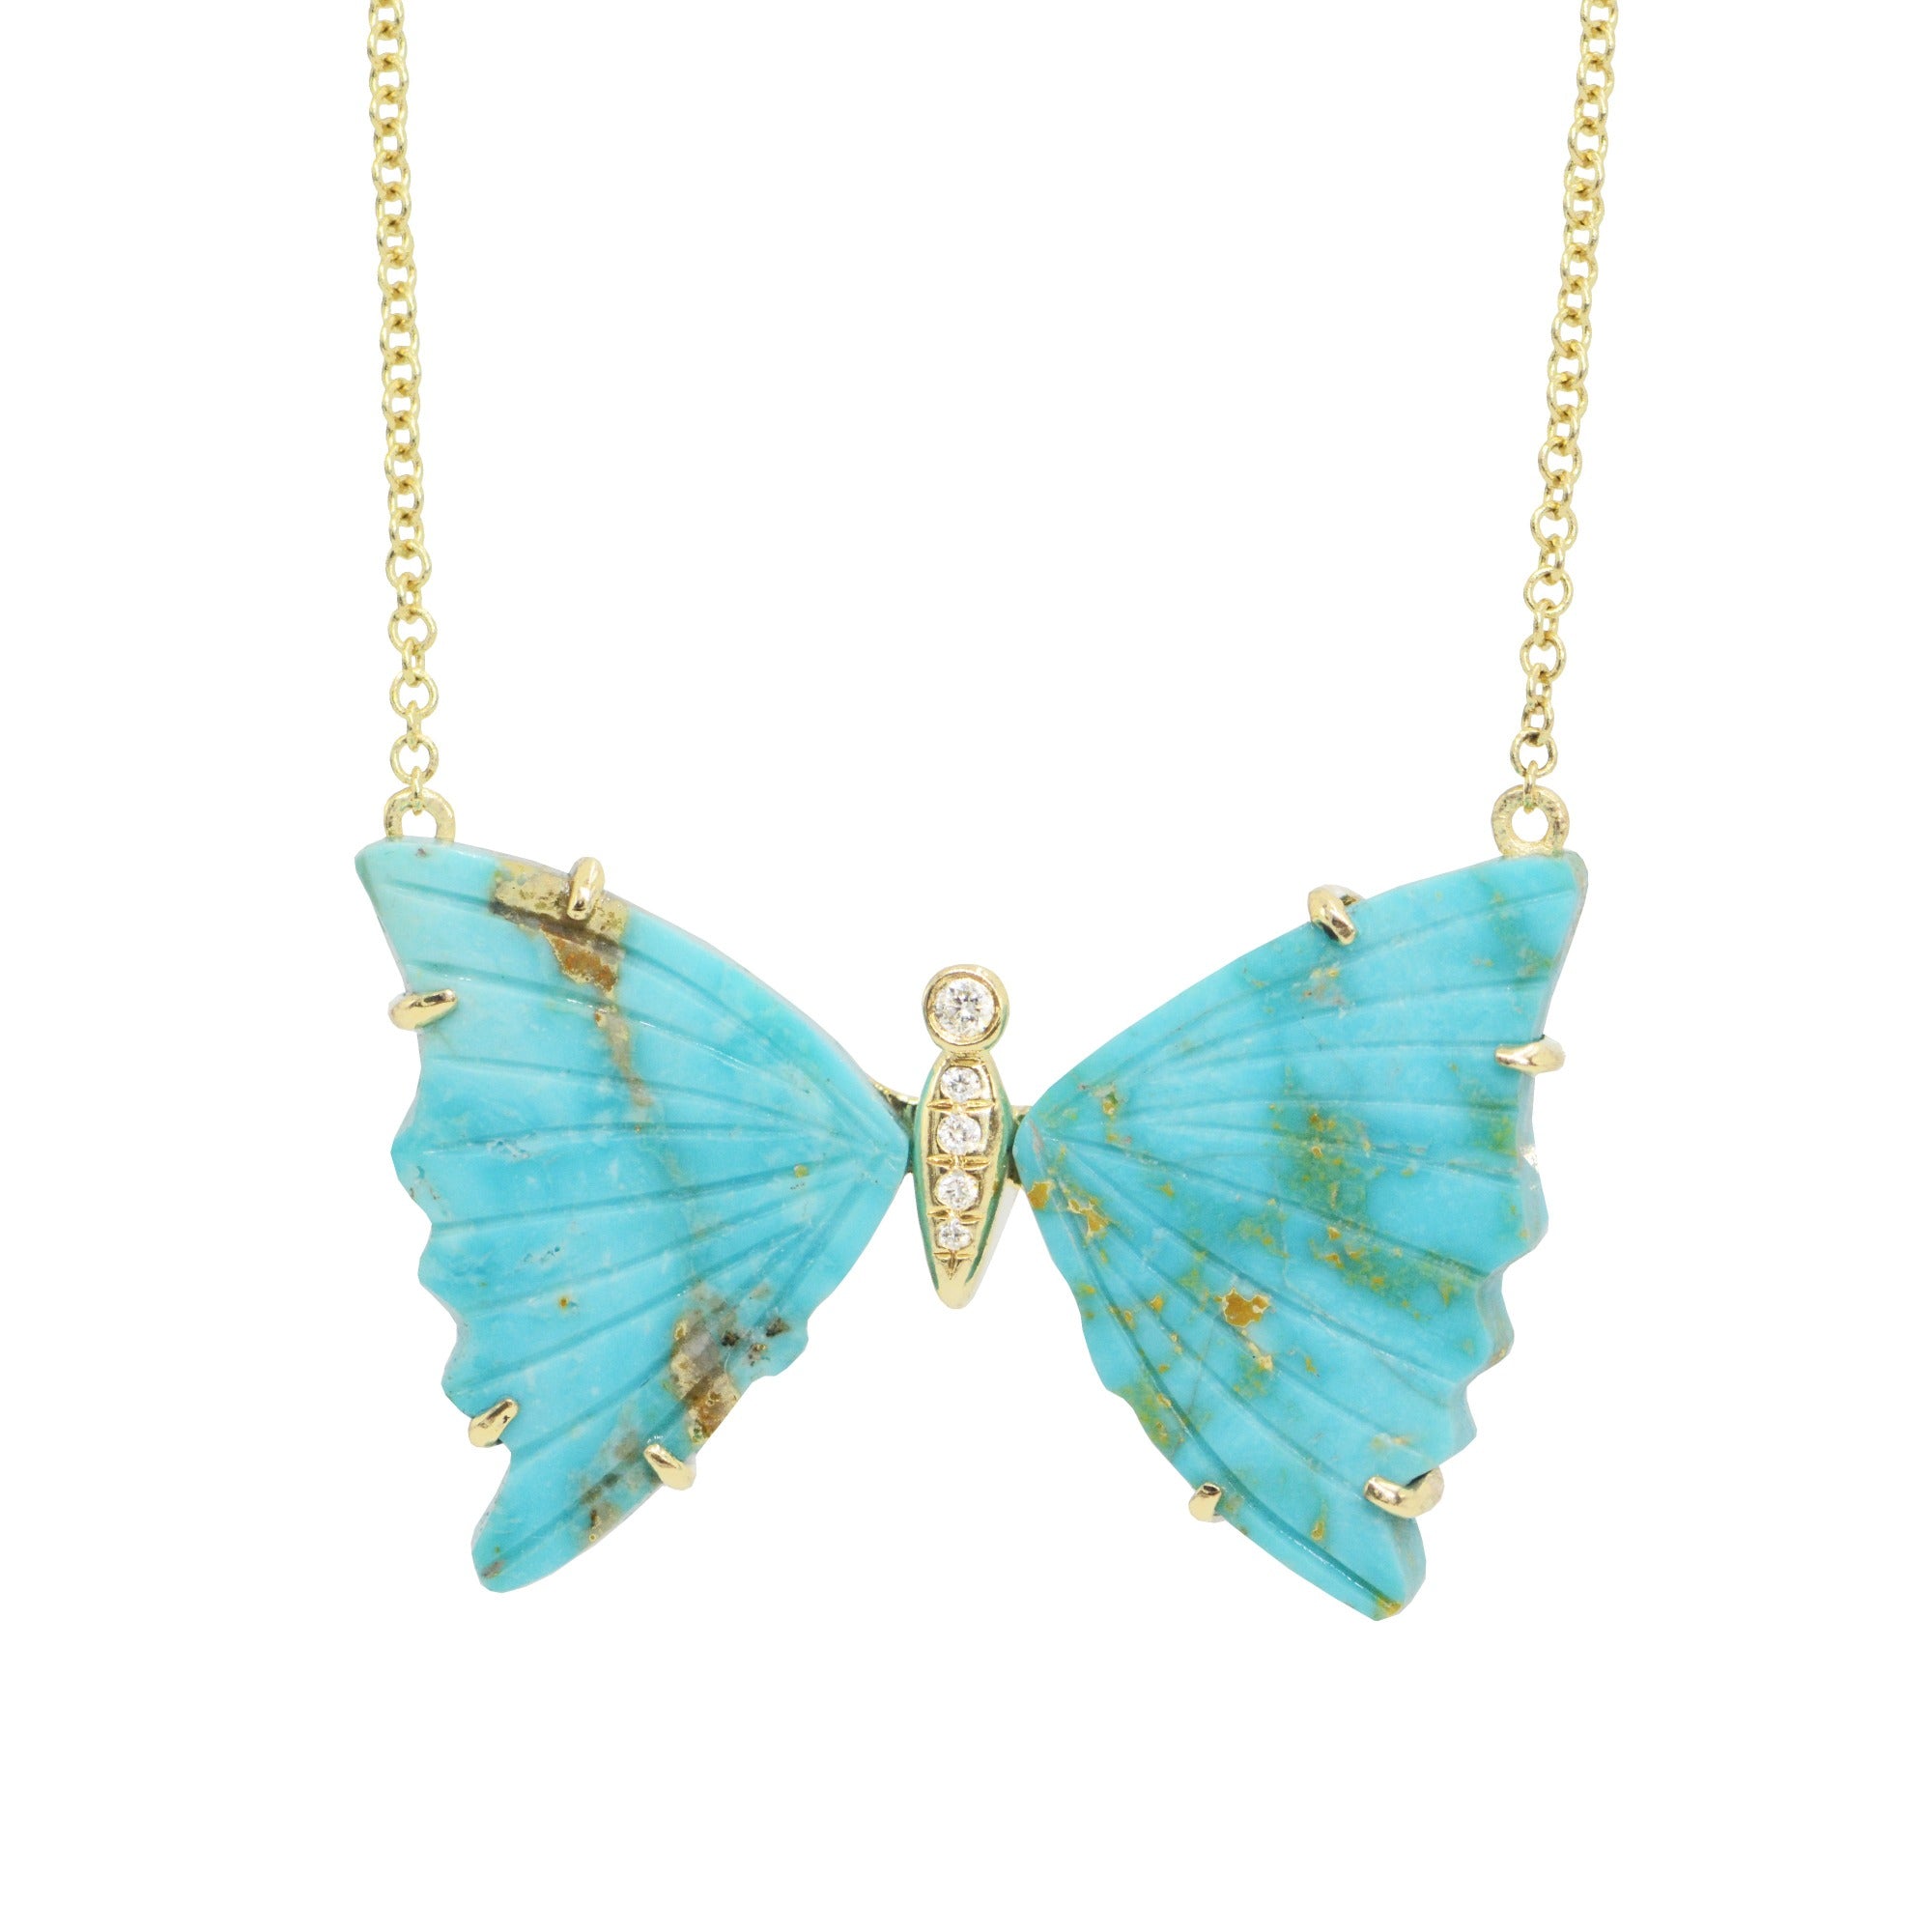 large turquoise butterfly necklace with diamonds and prongs